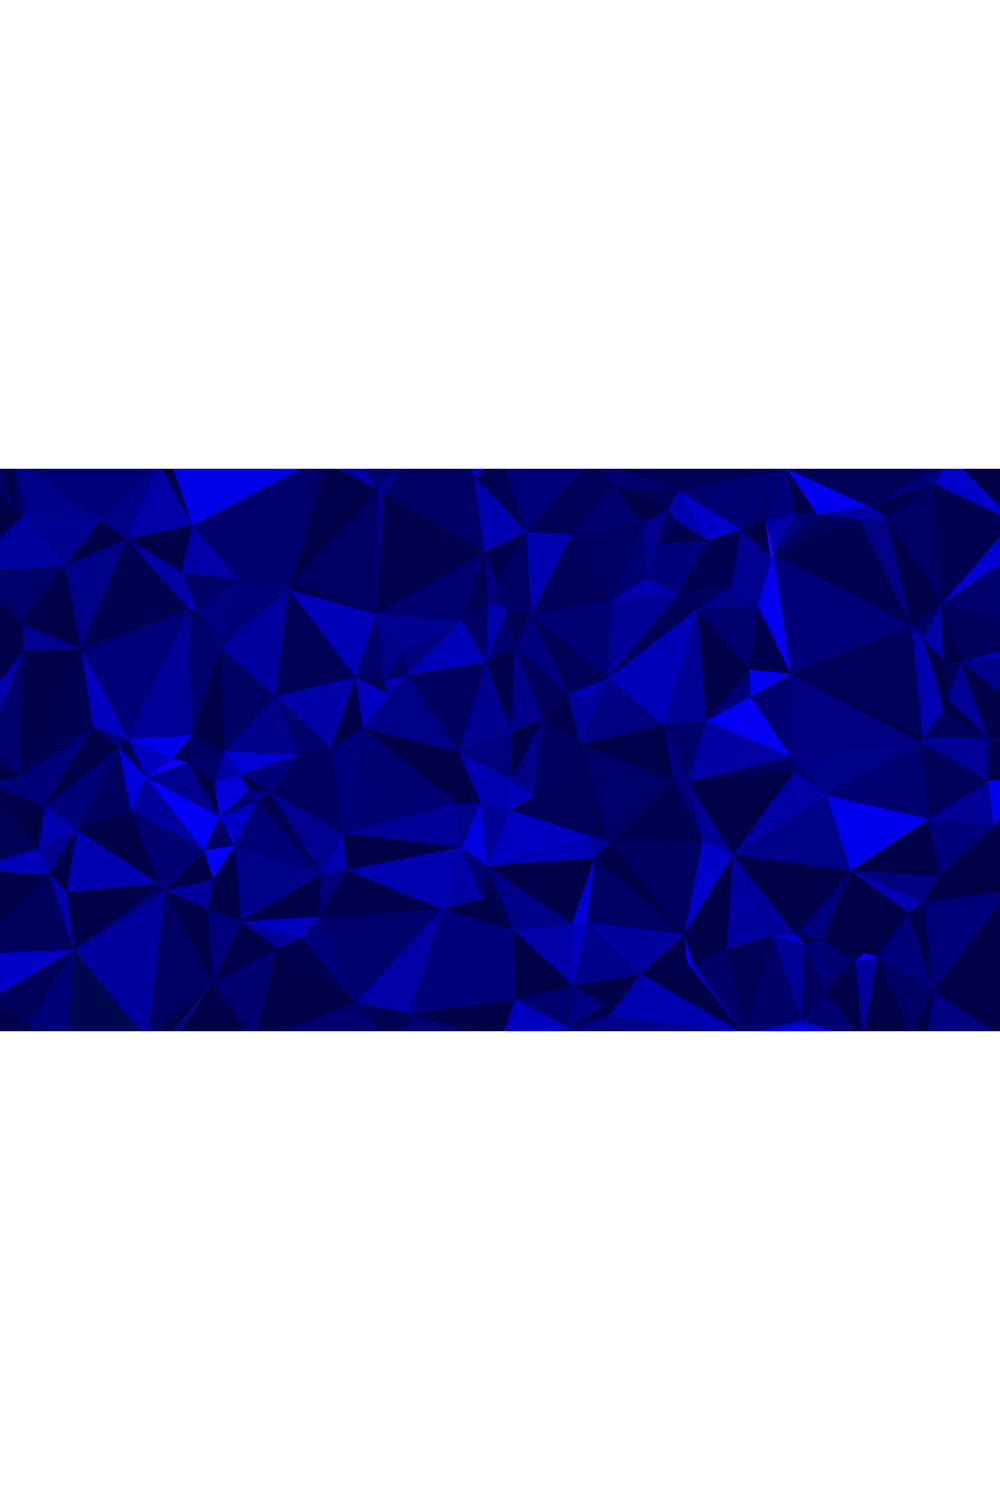 geometric triangles blue abstract background pinterest preview image.